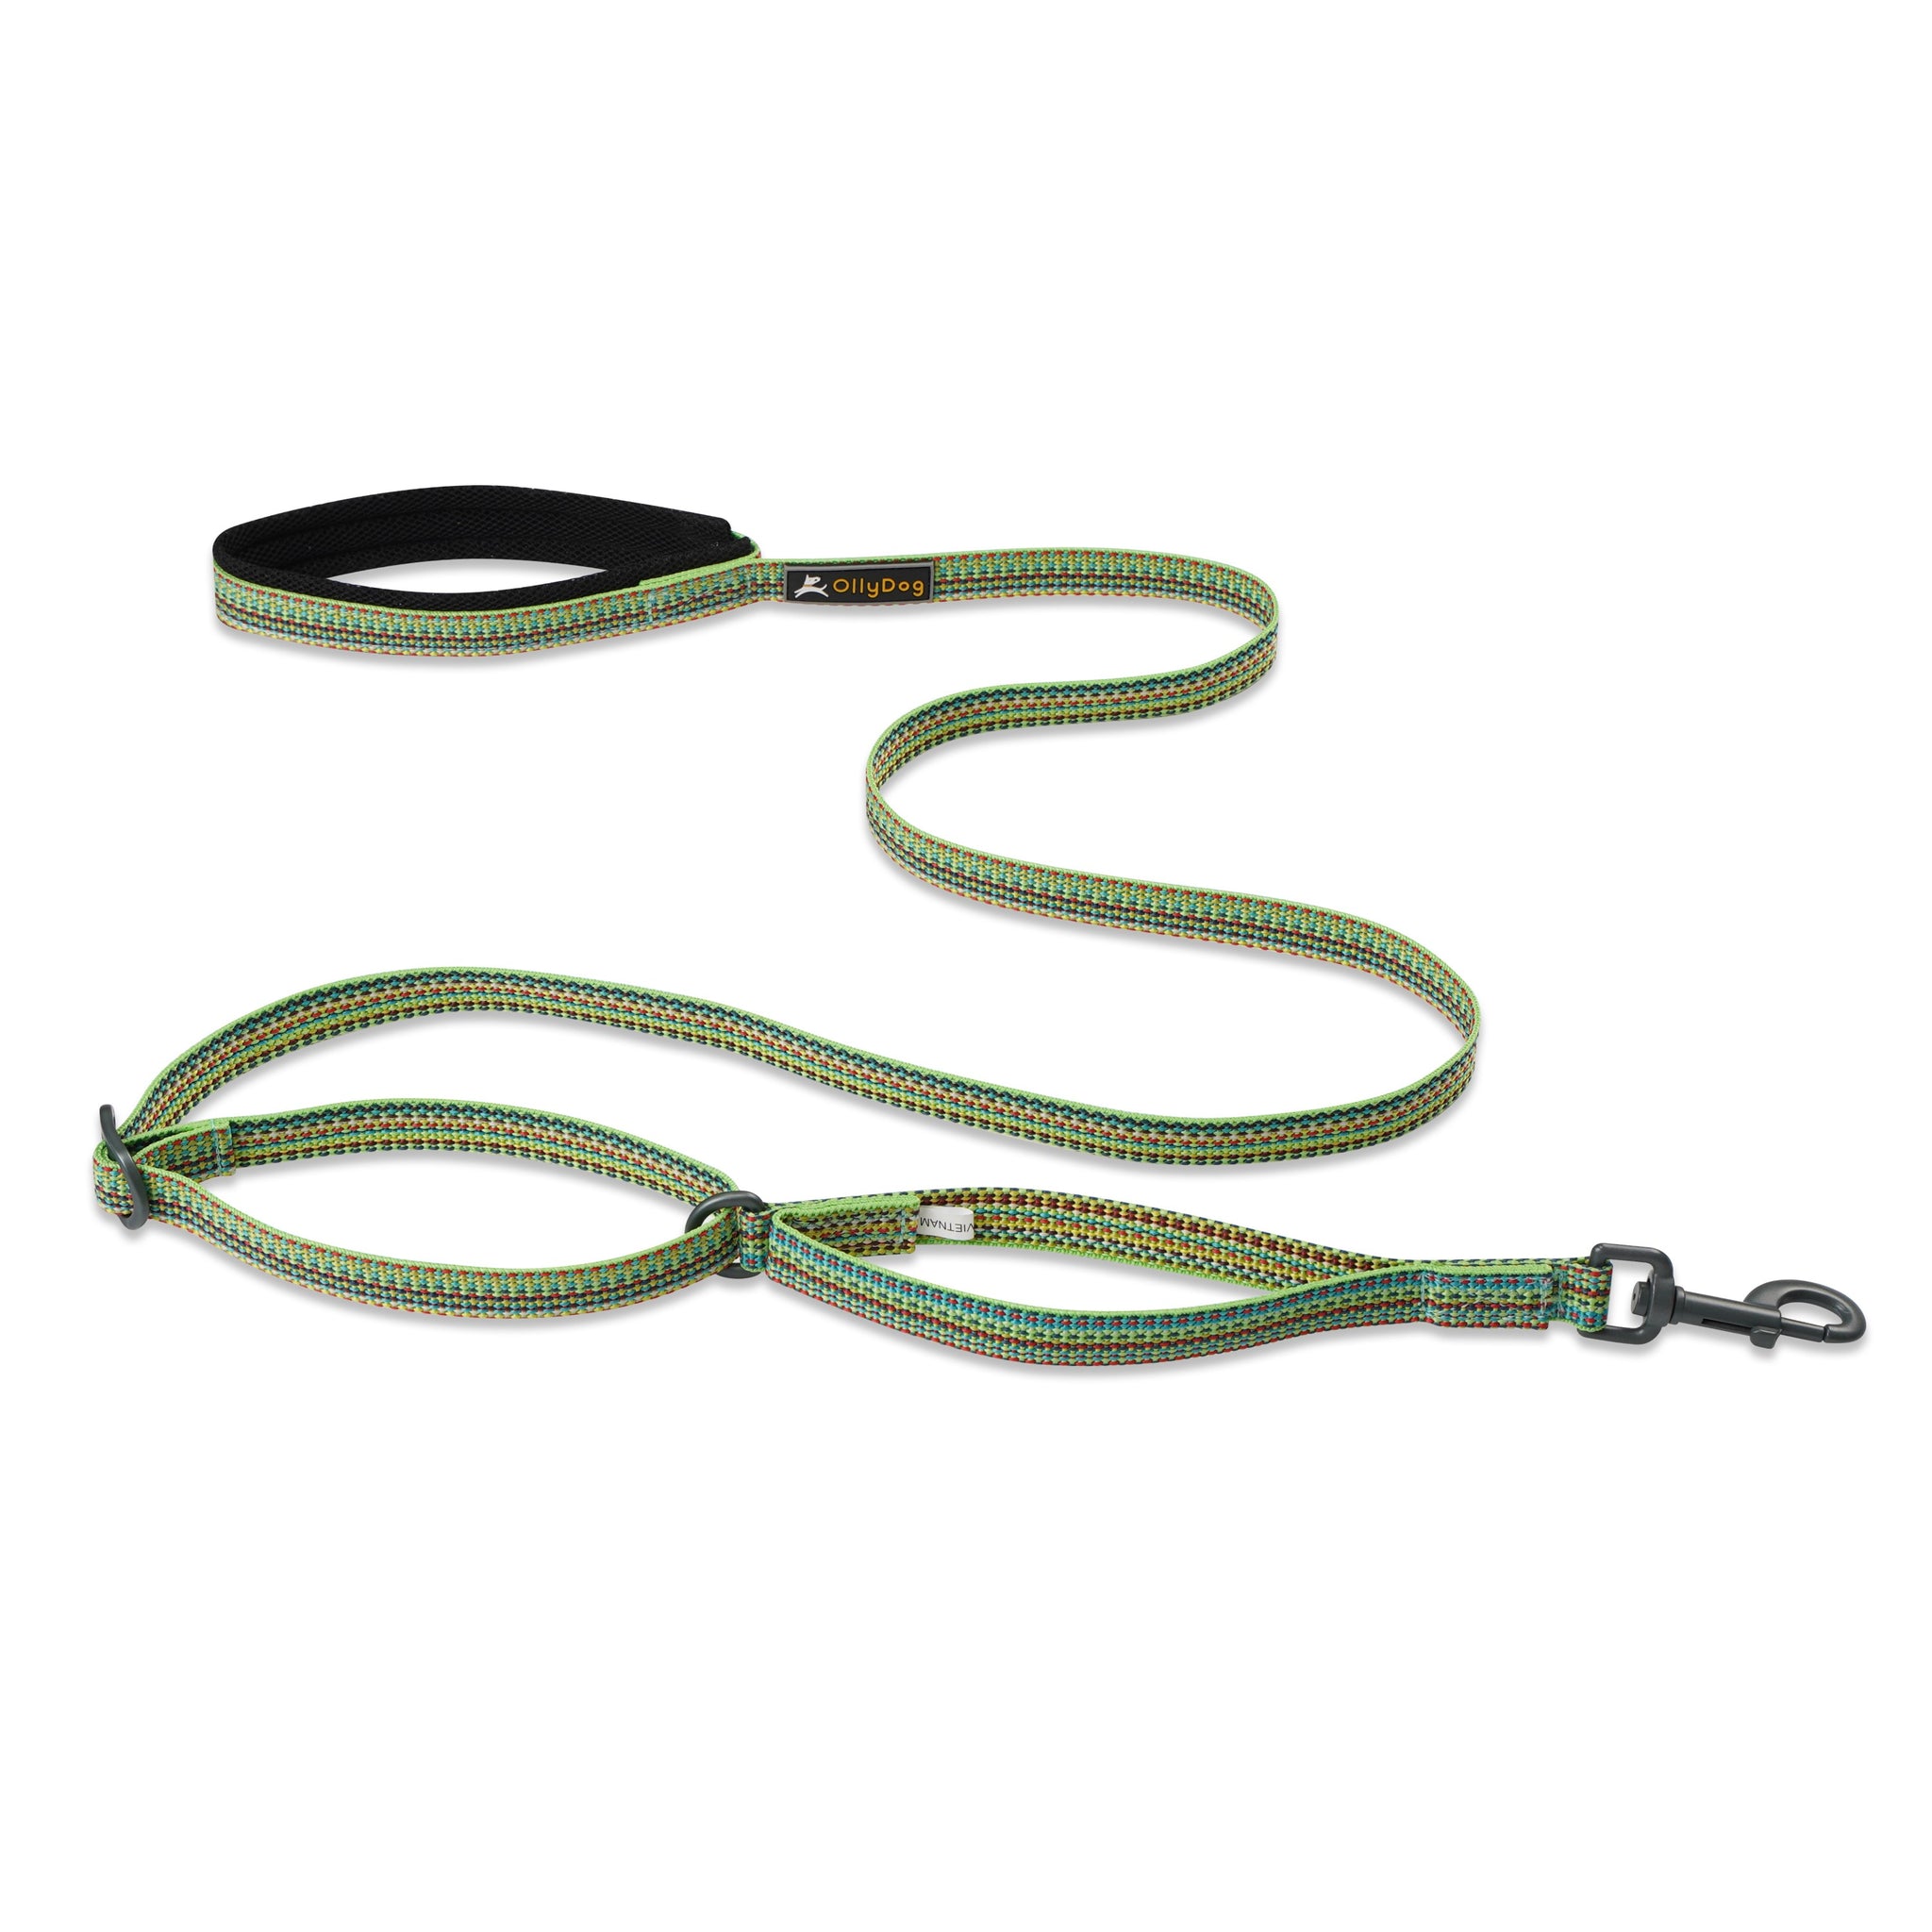 Rescue Adjustable Leash- Save 20% at Checkout